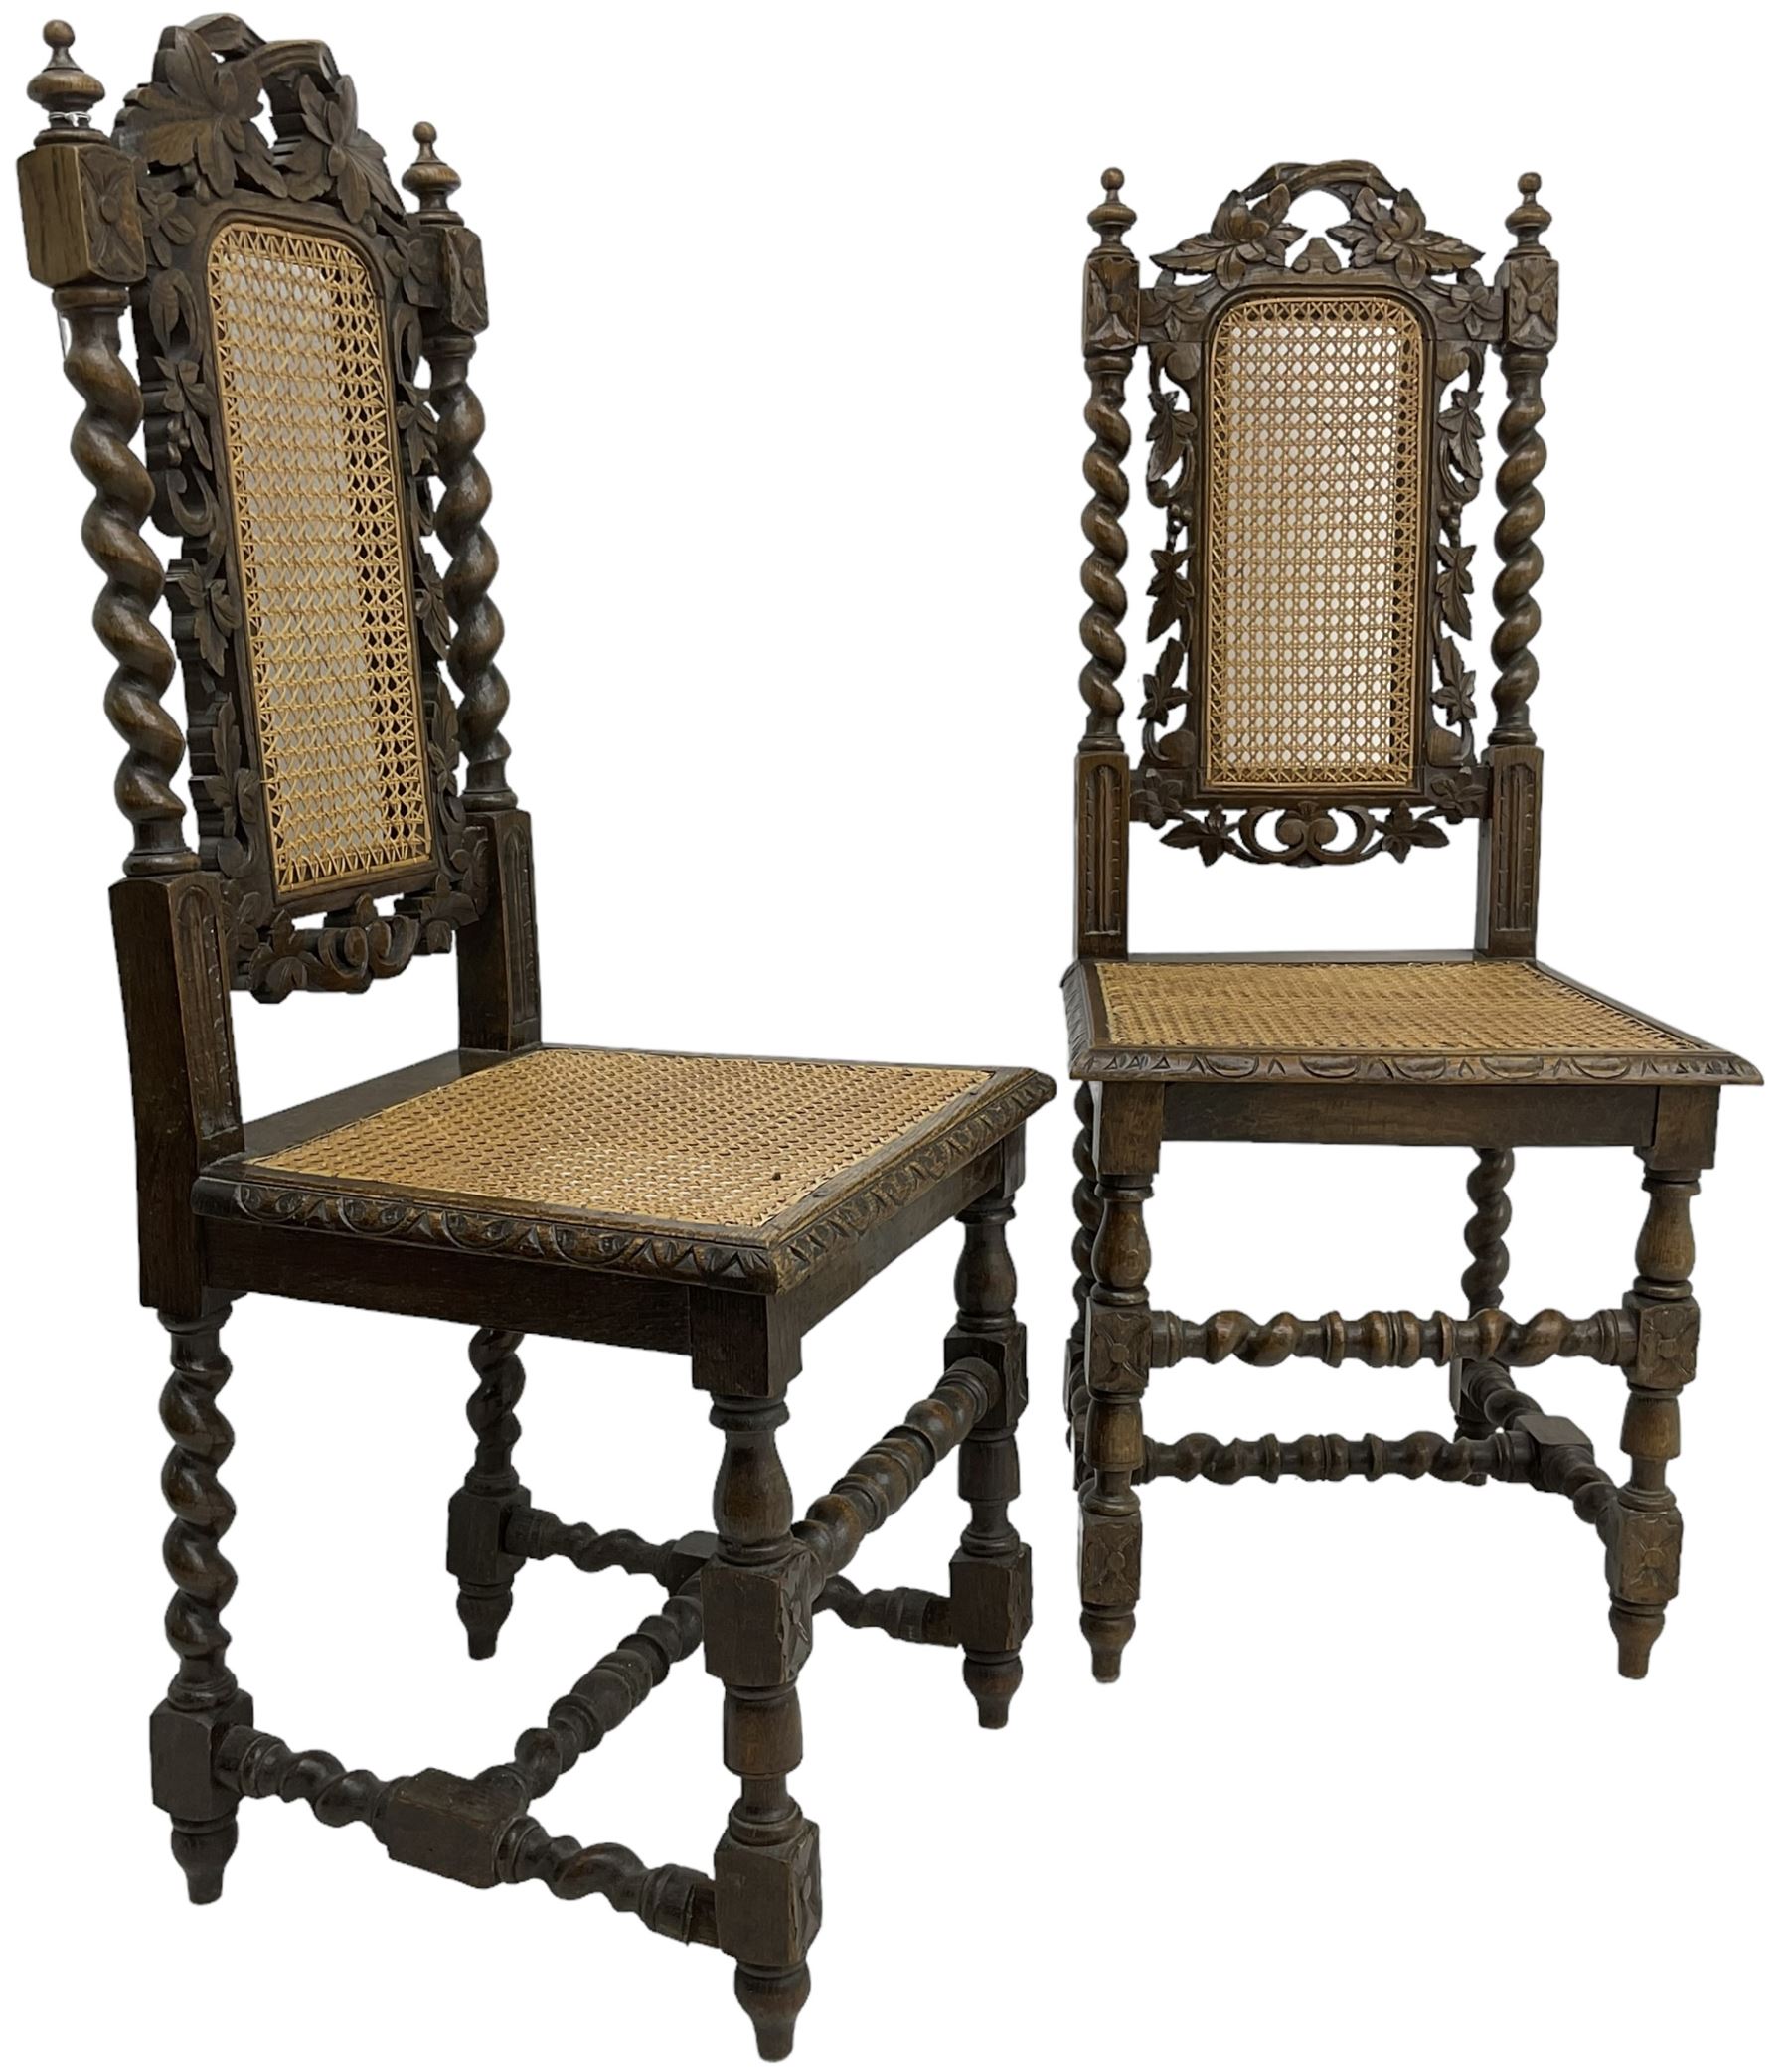 Pair of Victorian Gothic Revival carved oak chairs - Image 2 of 5